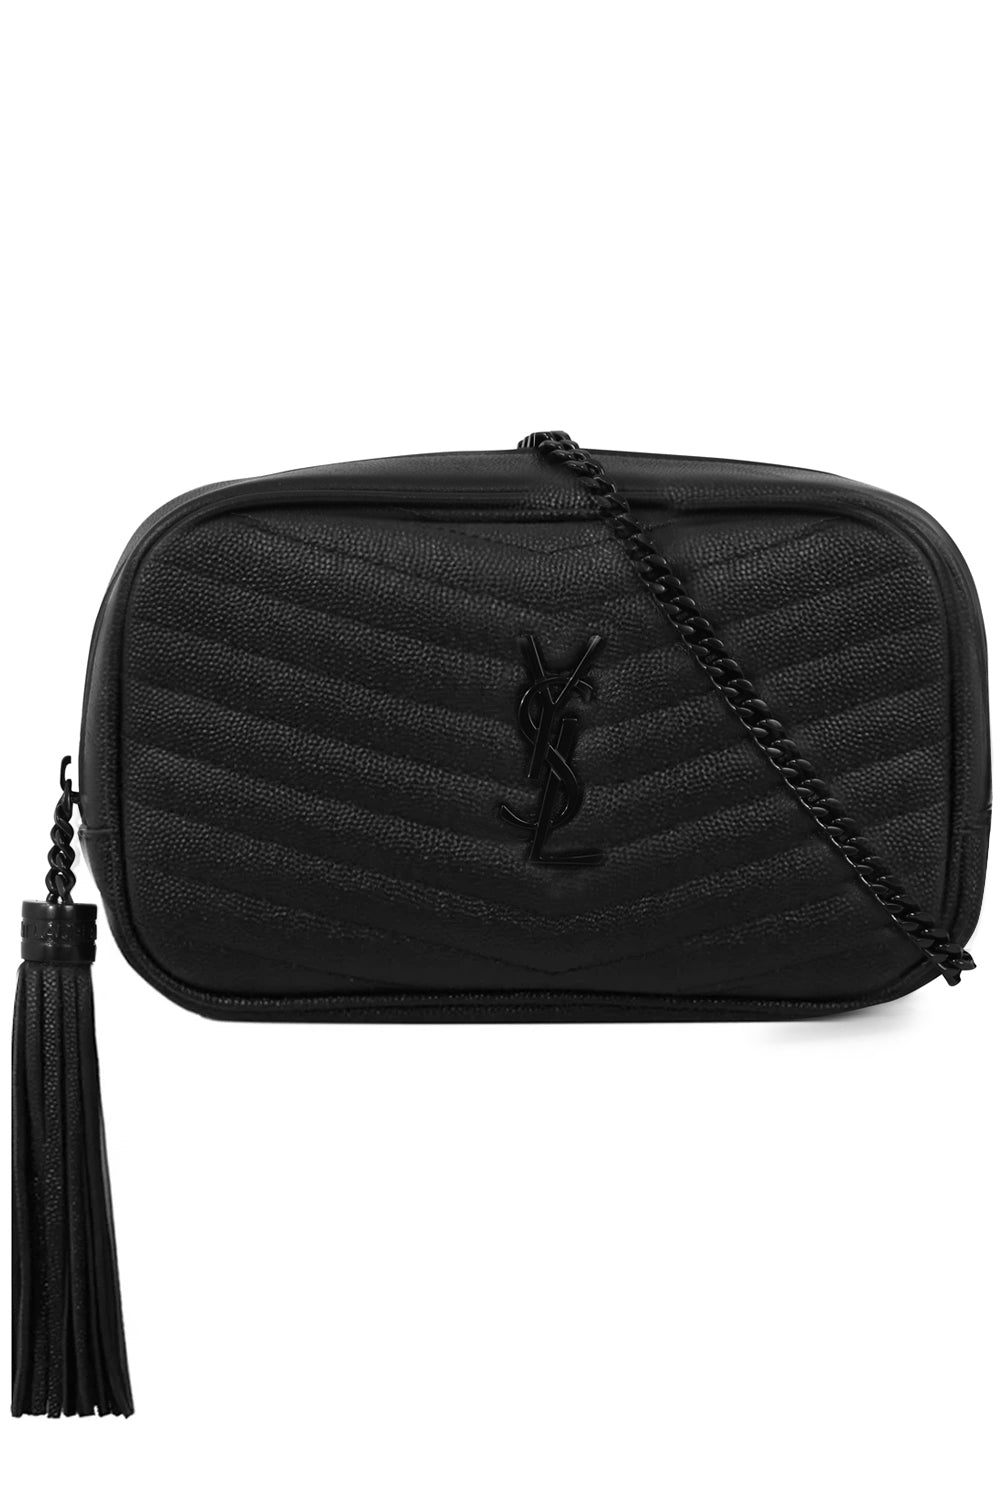 Saint Laurent Quilted Puffer Tote Bag - Farfetch